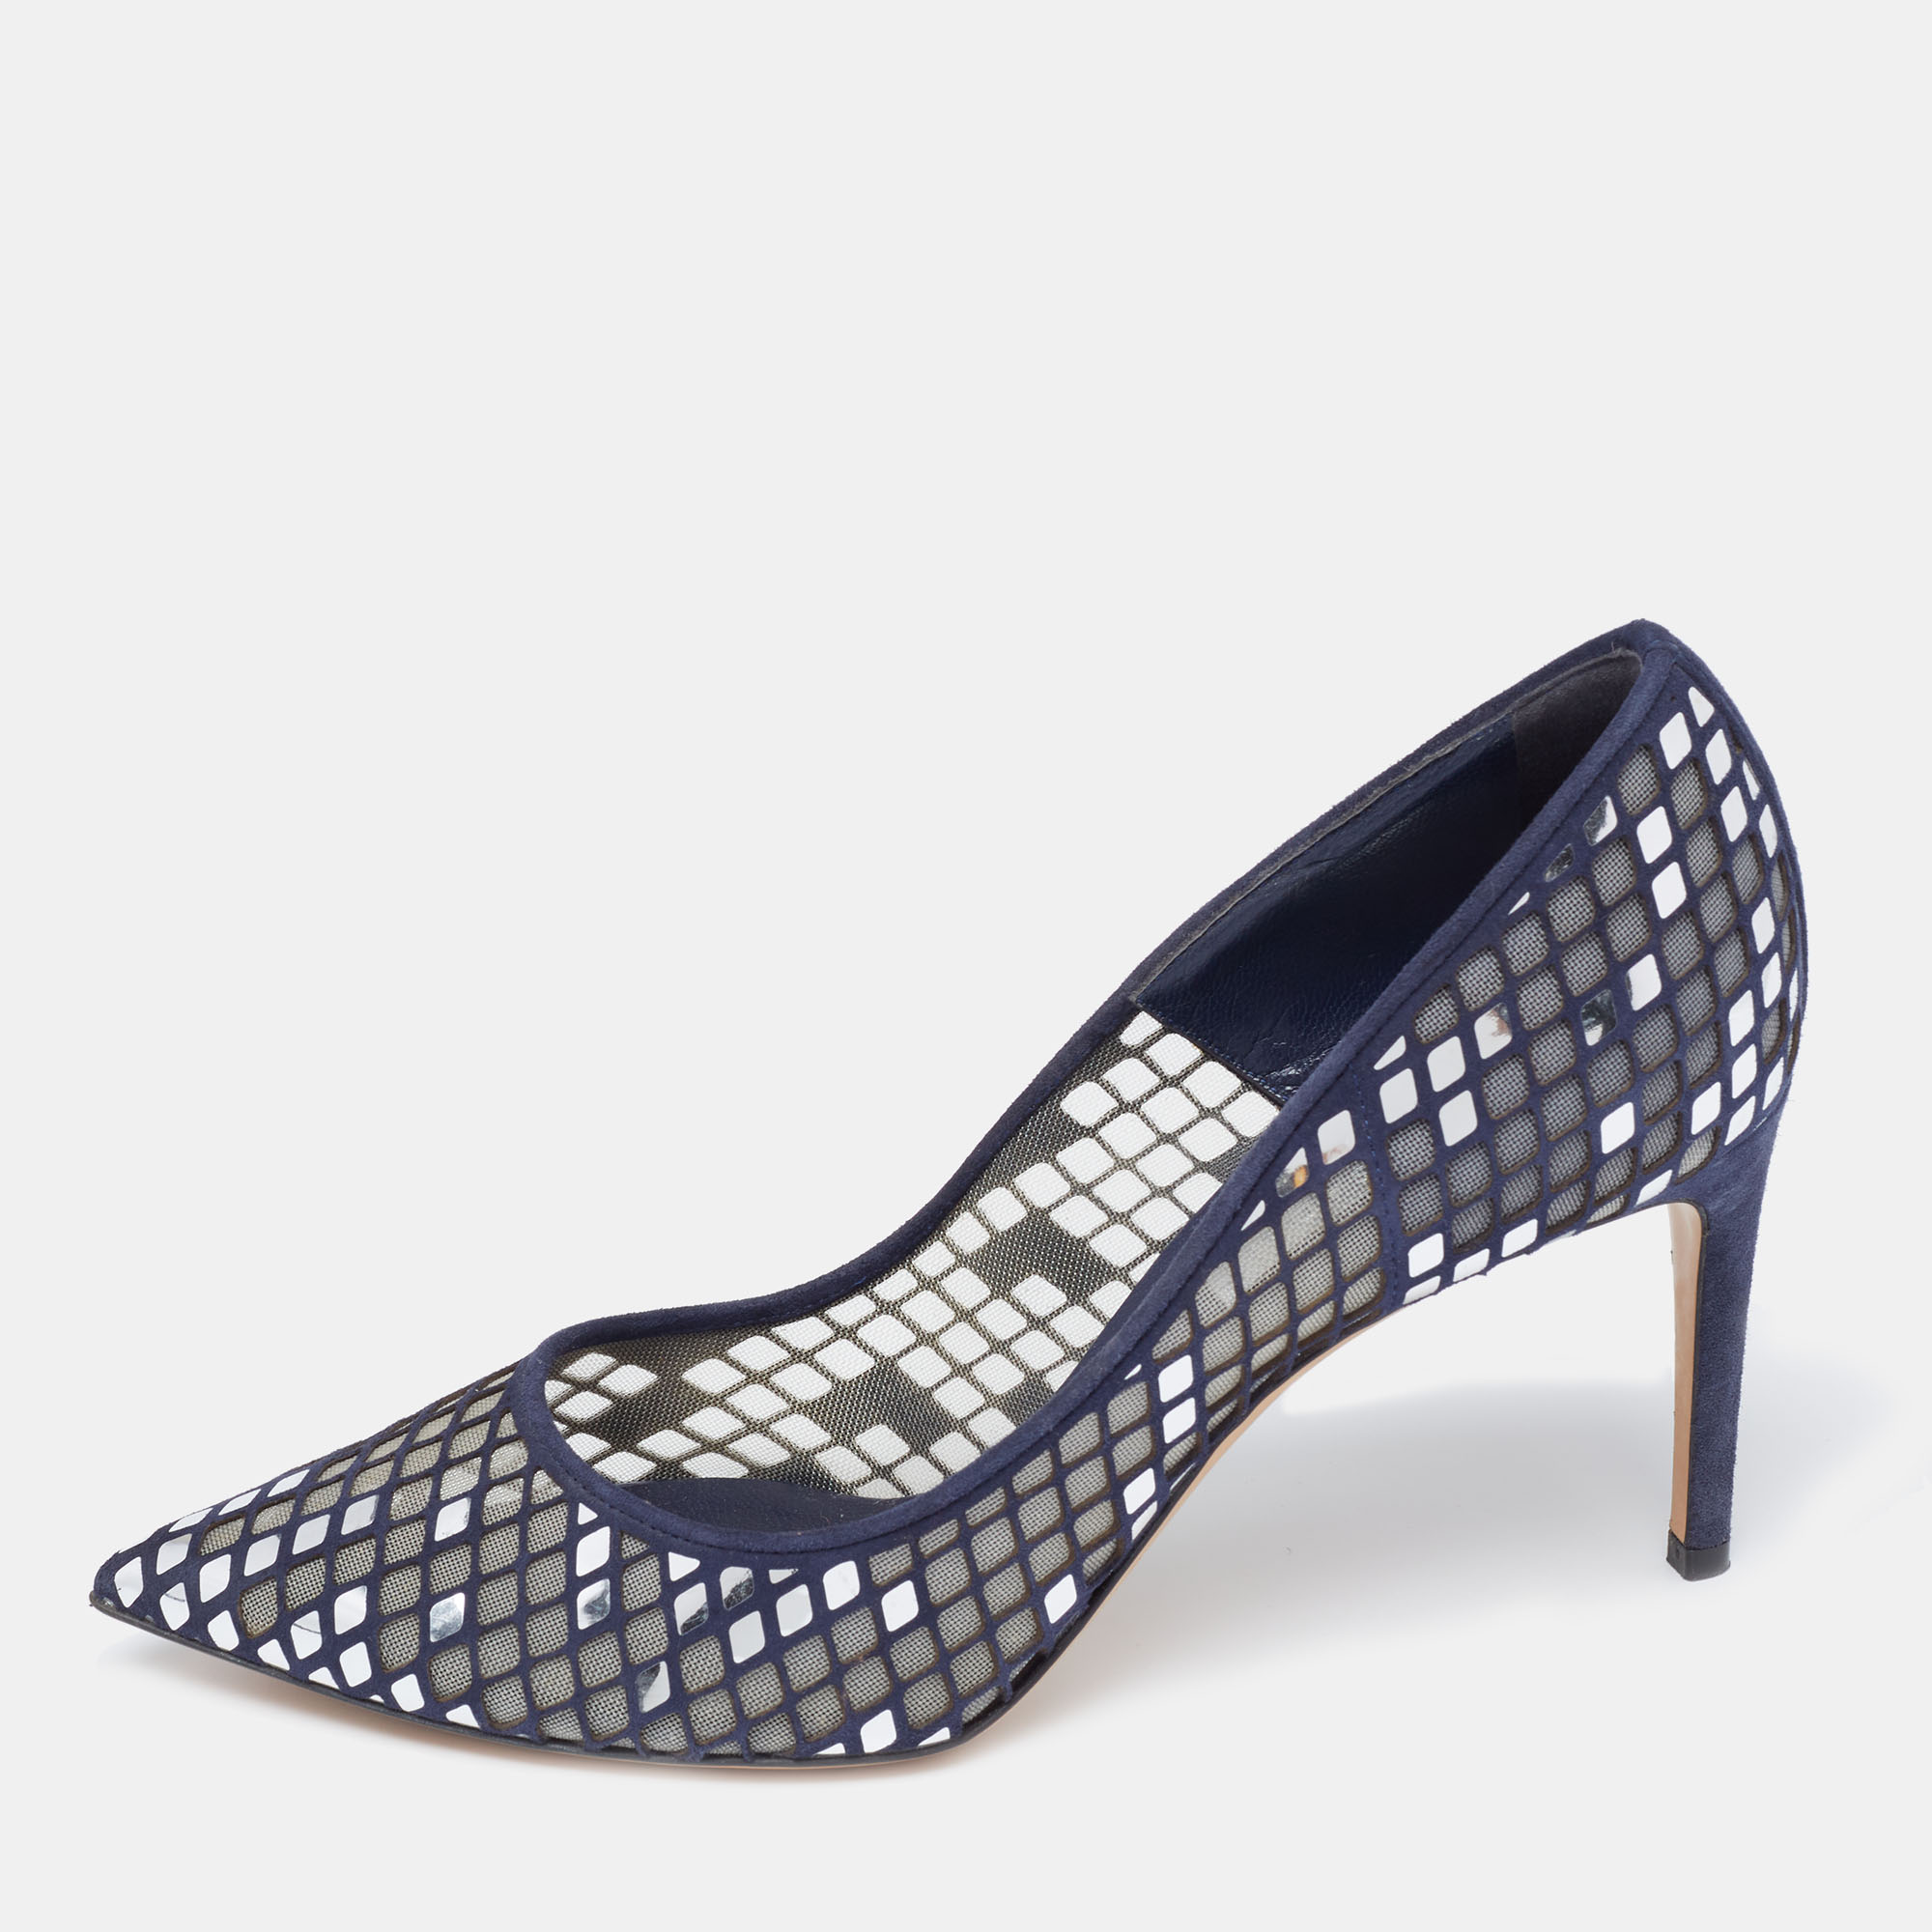 A sophisticated pair of pumps like this one can add oodles of style to your ensemble. From their shape and detailing to their overall appeal these Casadei pumps are utterly mesmerizing. Crafted from mesh and suede they feature clean cut details that perfectly complement the sleek pointed toes and 9 cm stiletto heels.